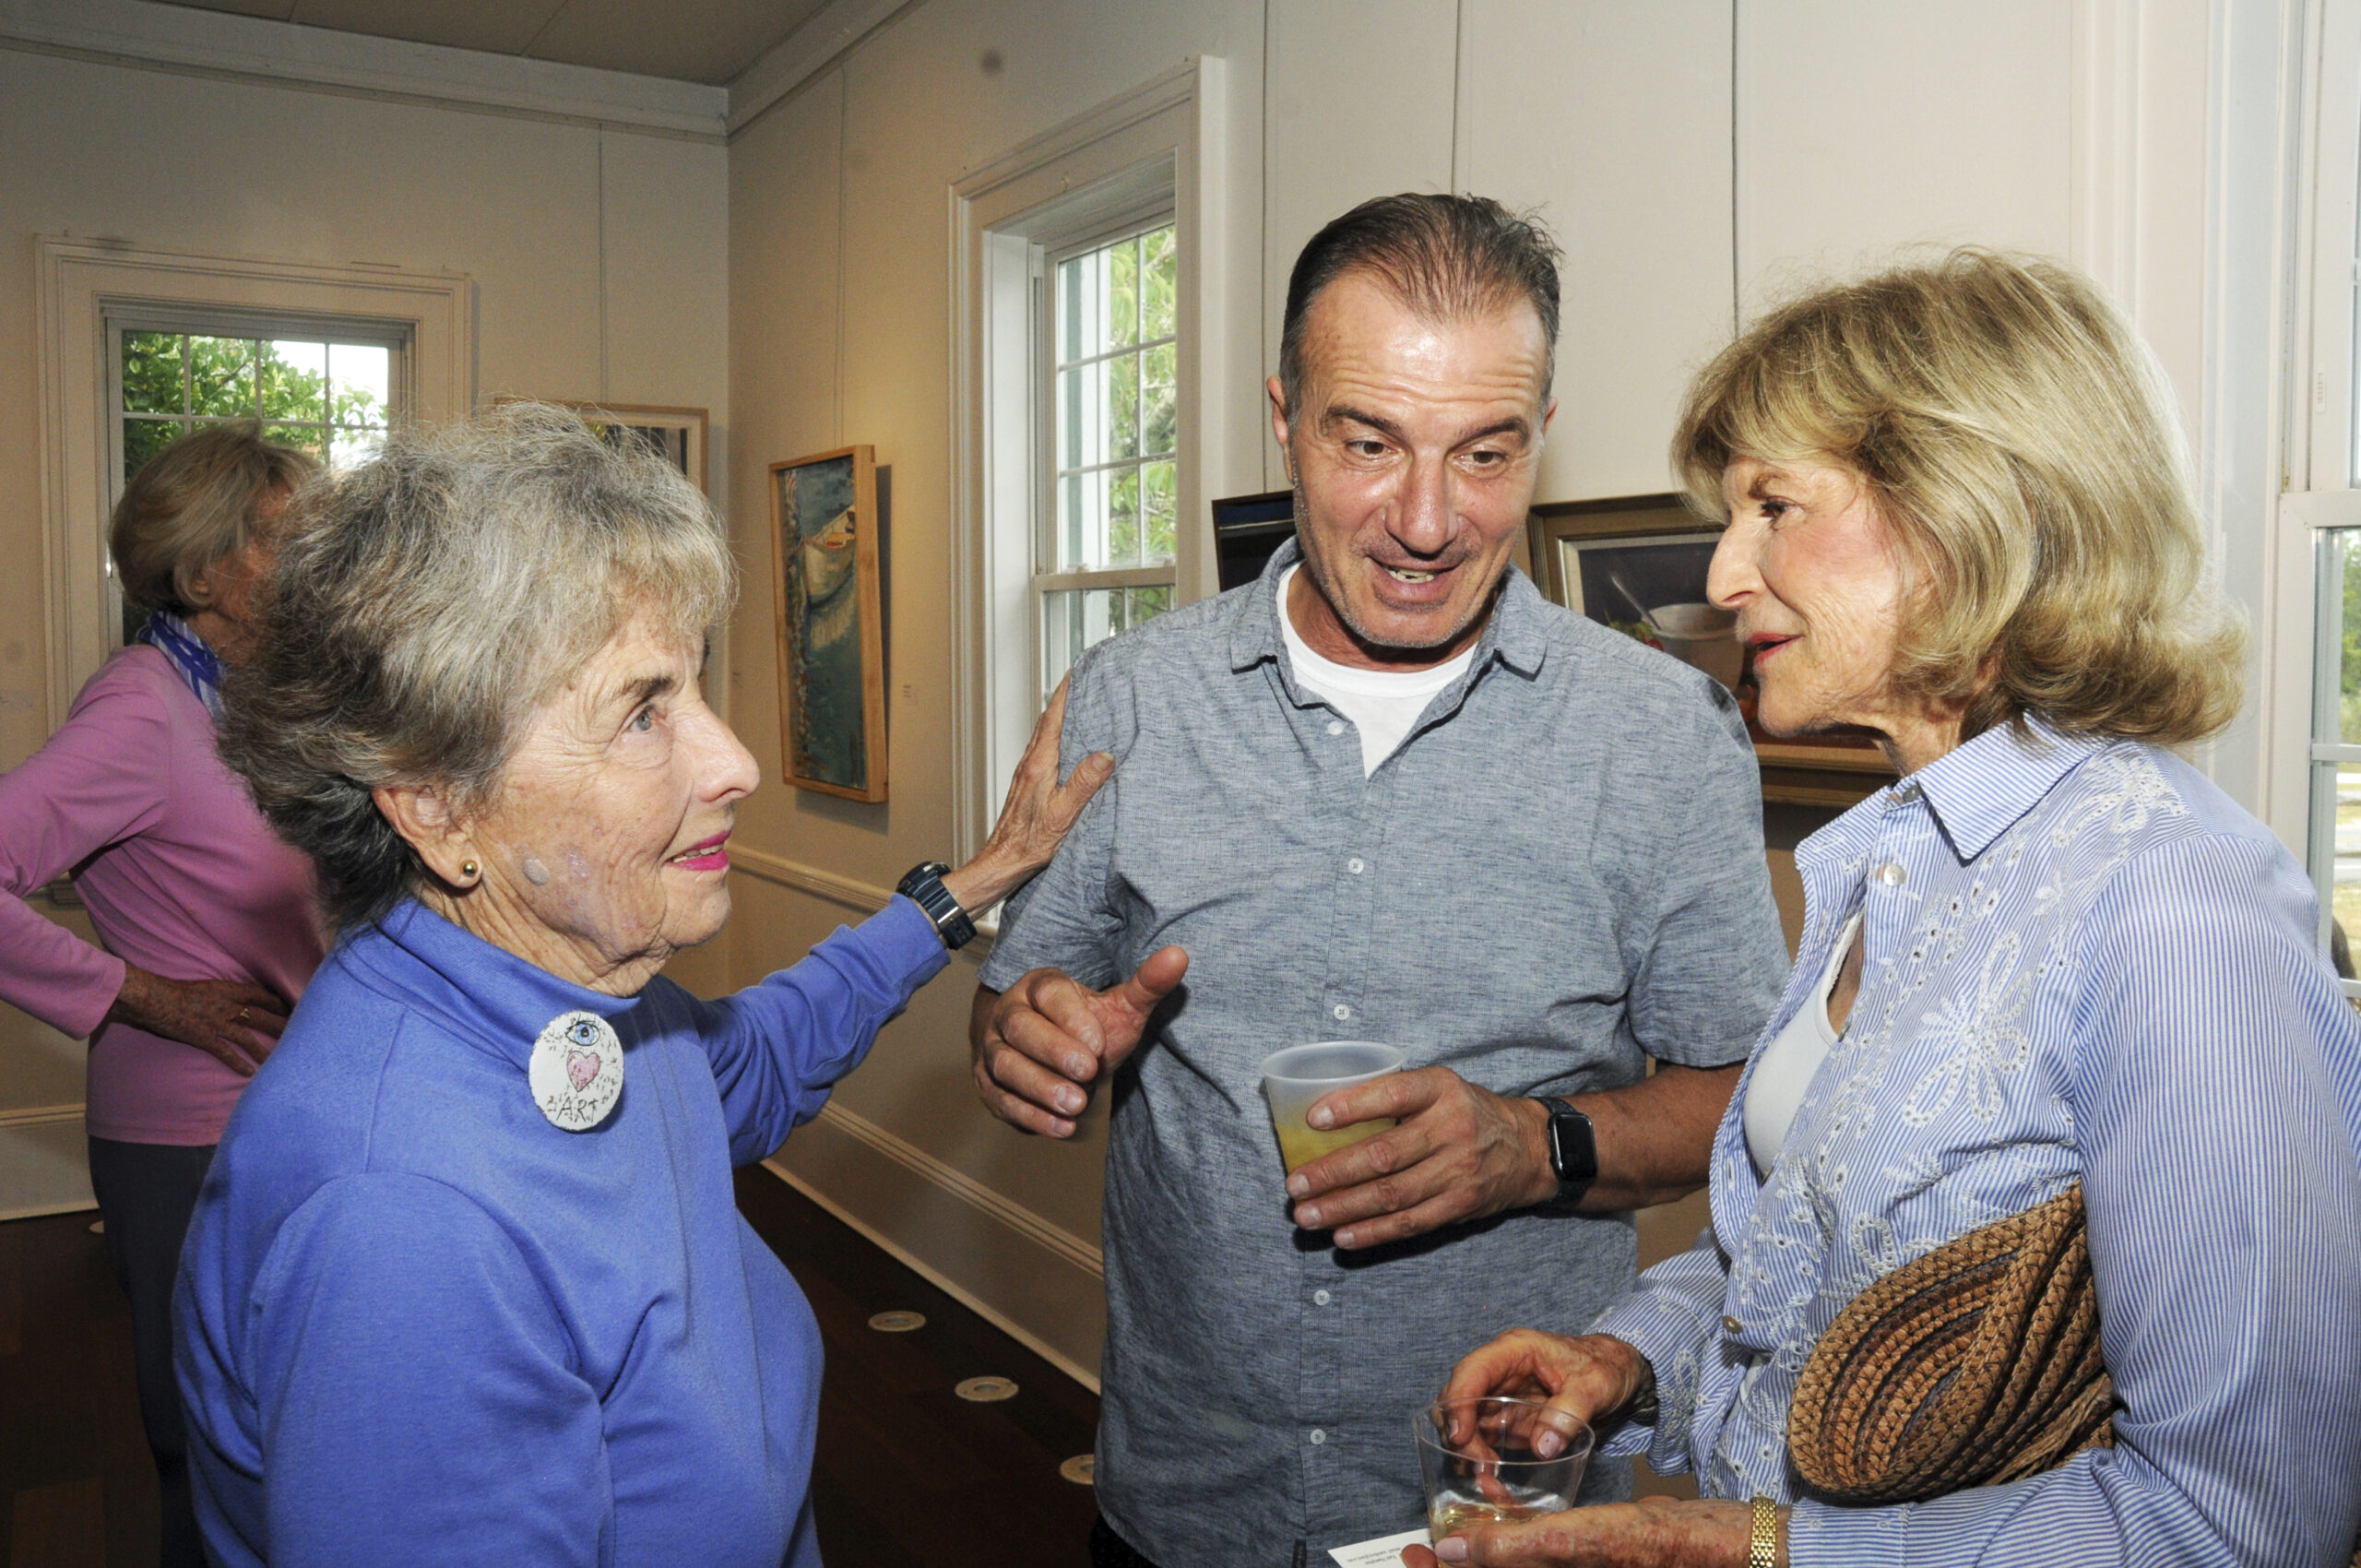 Anne Hecht, Haim Mizrahi and Betsy Pinover Schiff at the Springs Improvement Society's opening of its 55th Annual Springs Artists Invitational art show and sale at Ashawagh Hall. The show was curated by artist Haim Mizrahi, and featured a commemorative poster created and signed by Springs artist Eric Ernst.   RICHARD LEWIN